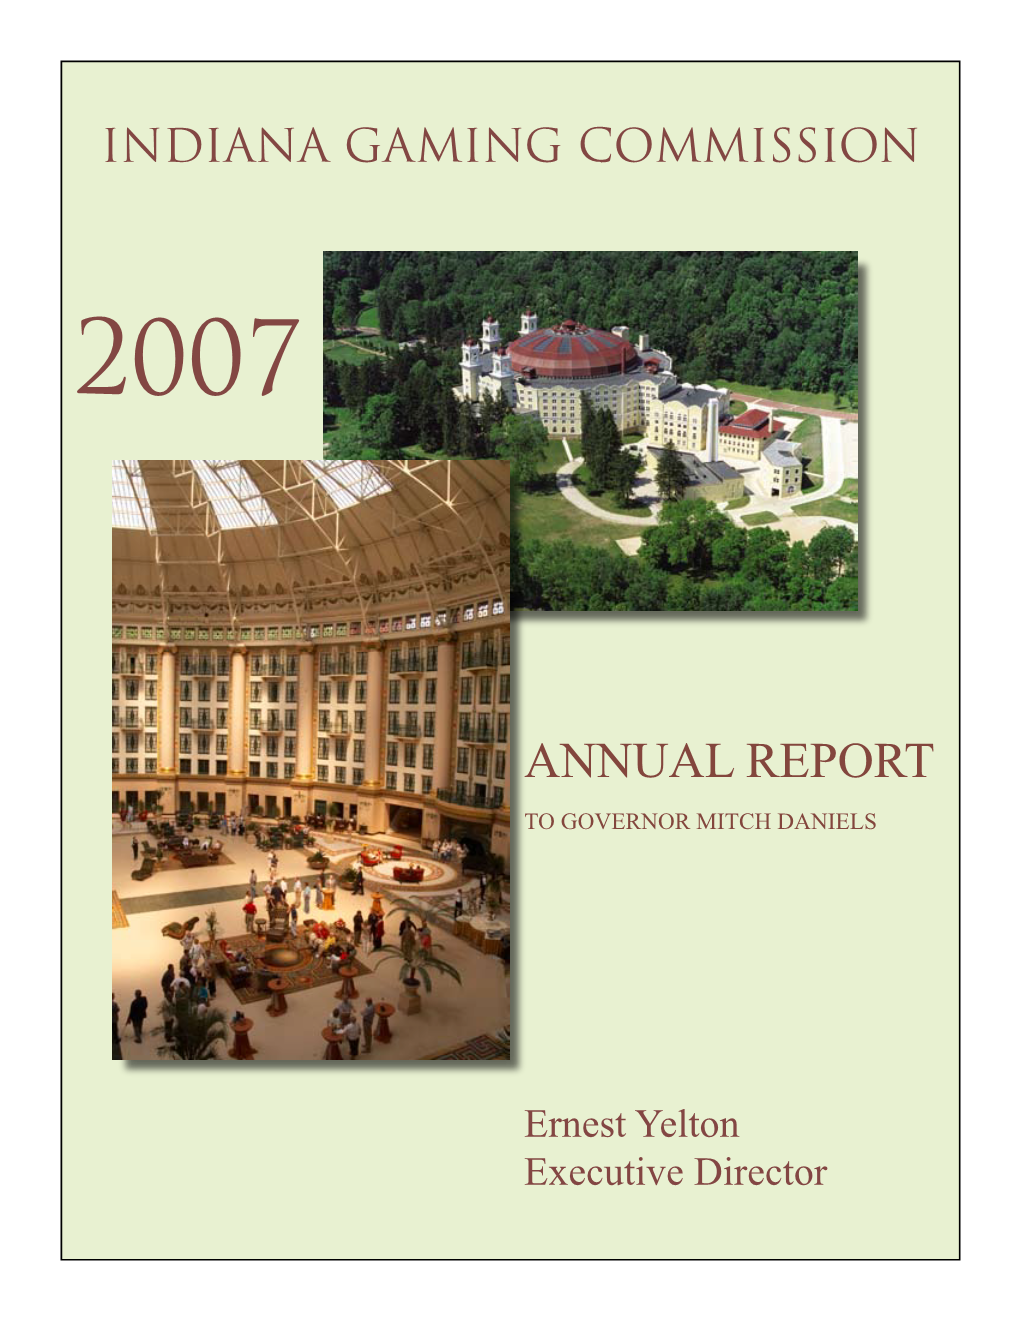 FY 2007 Annual Report